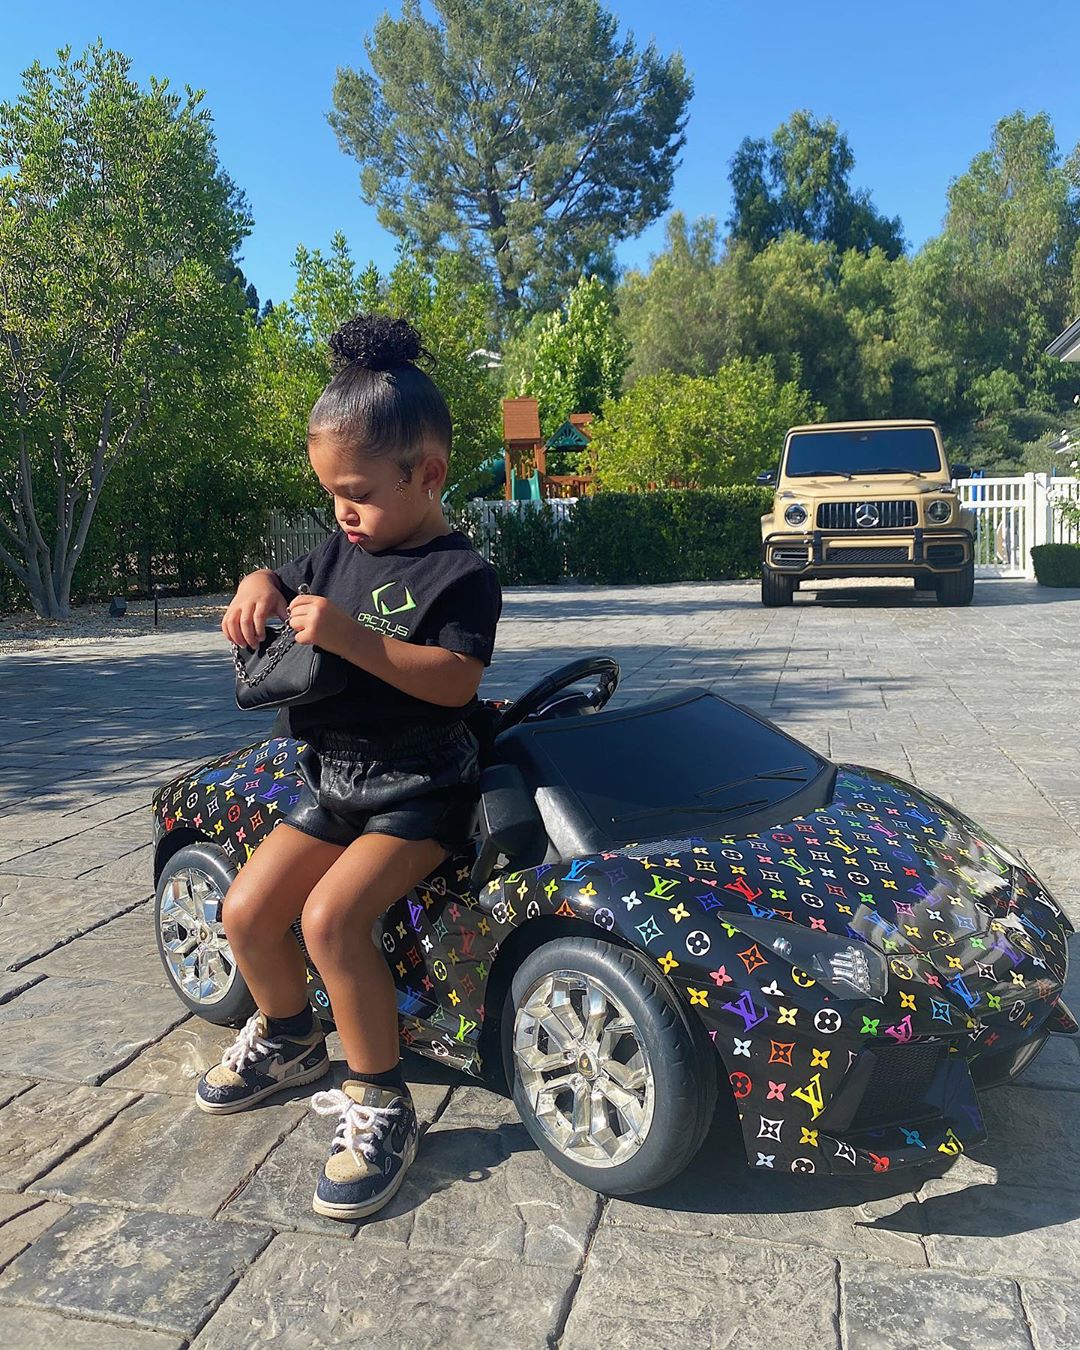 Kylie Jenner gifted daughter a LV monogram wrapped Lamborghini